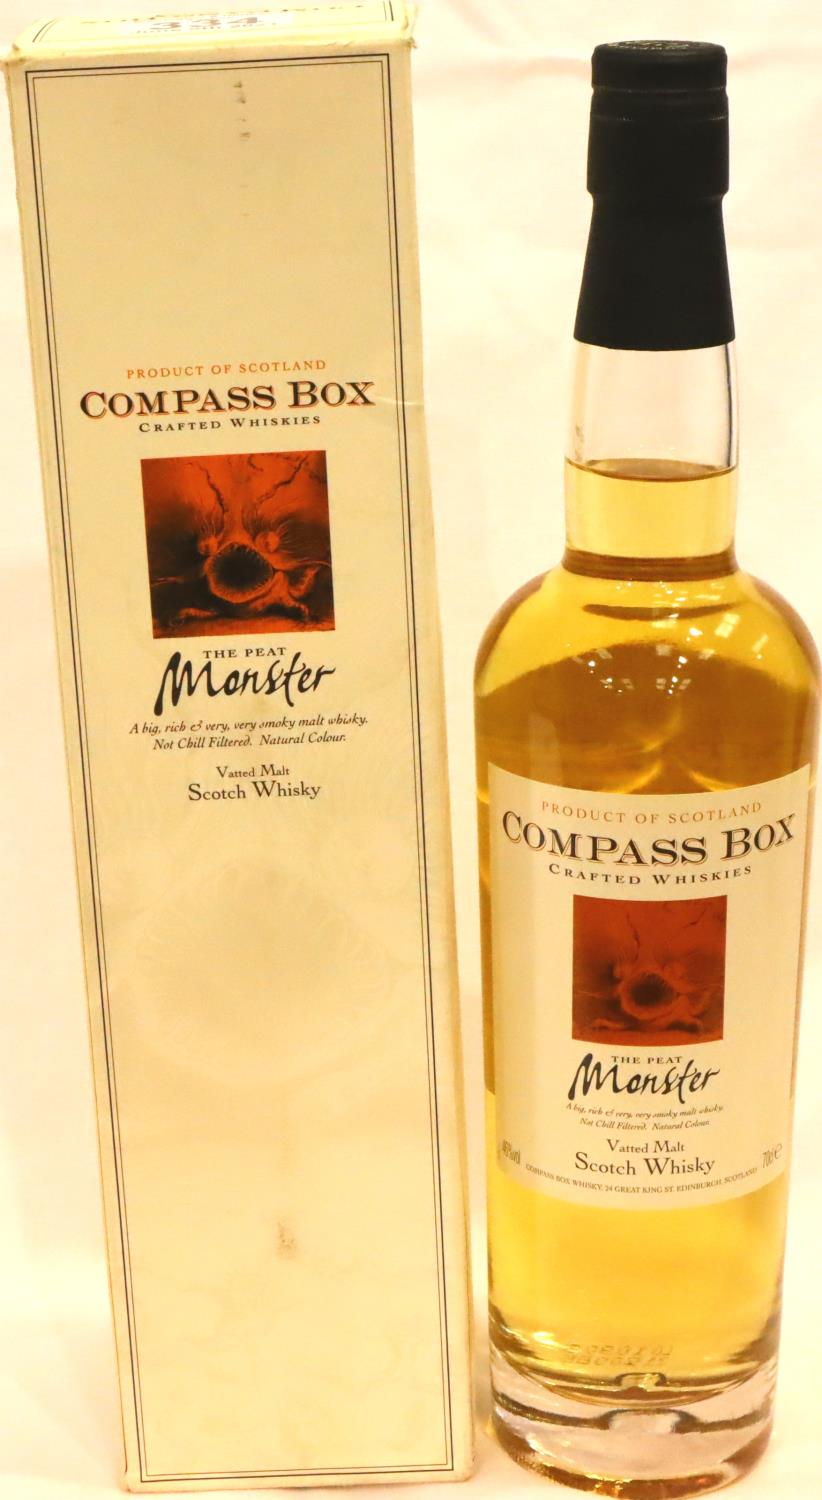 Bottle of Compass Box The Peat Monster vatted malt whisky. P&P Group 2 (£18+VAT for the first lot